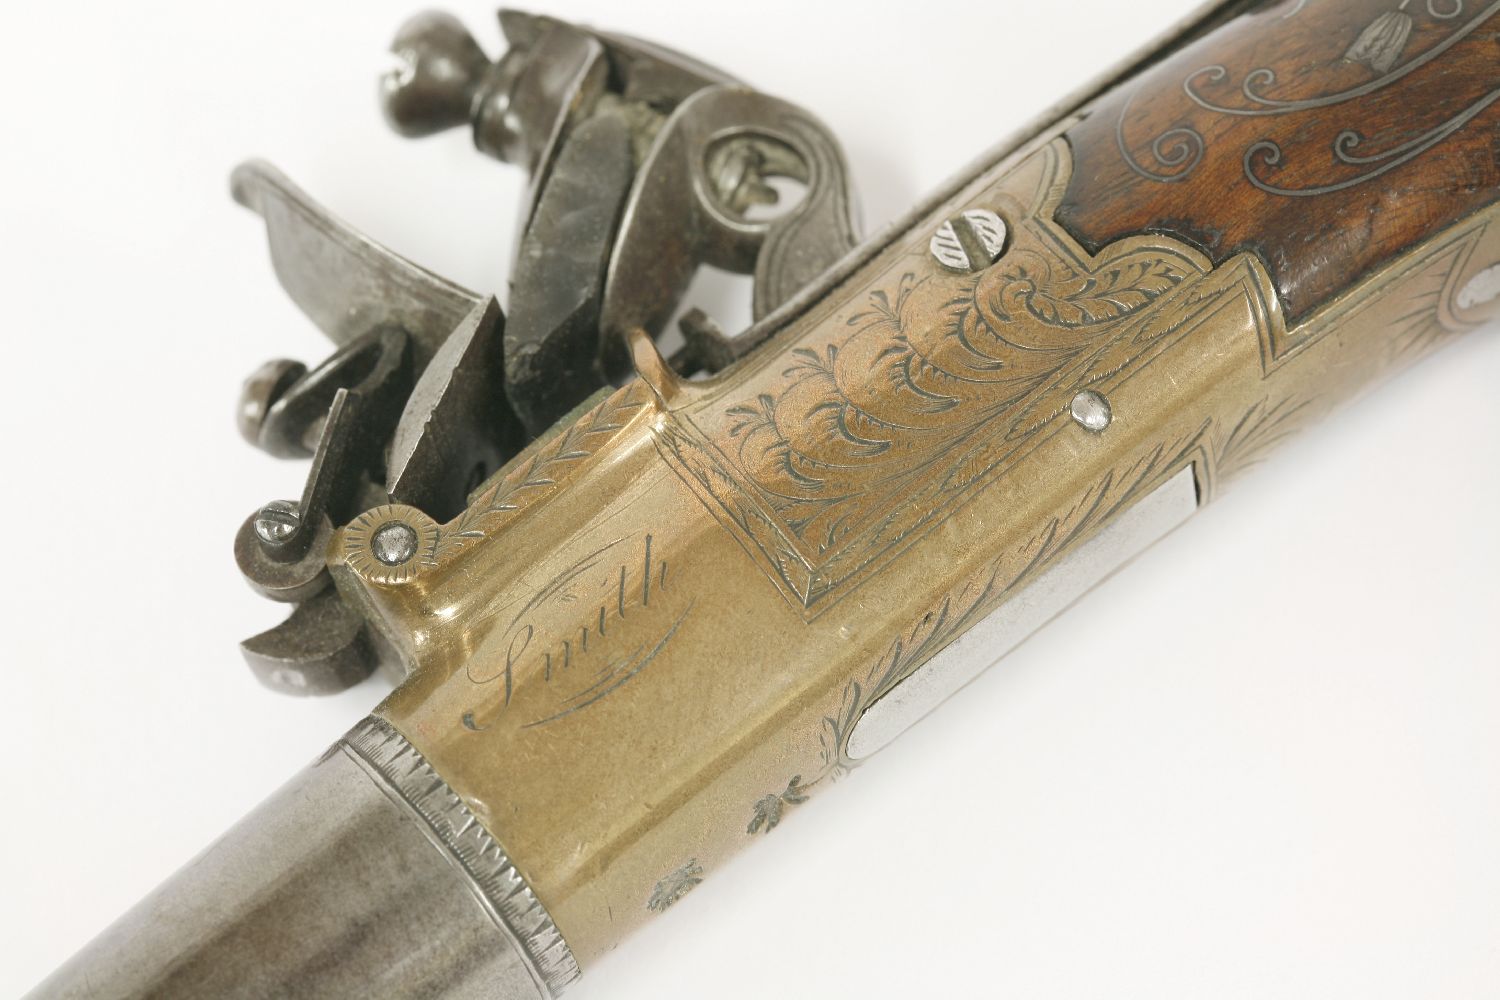 A flintlock pocket pistol, c.1800, by Smith, London, with turn-off barrel and brass stock, - Image 4 of 4